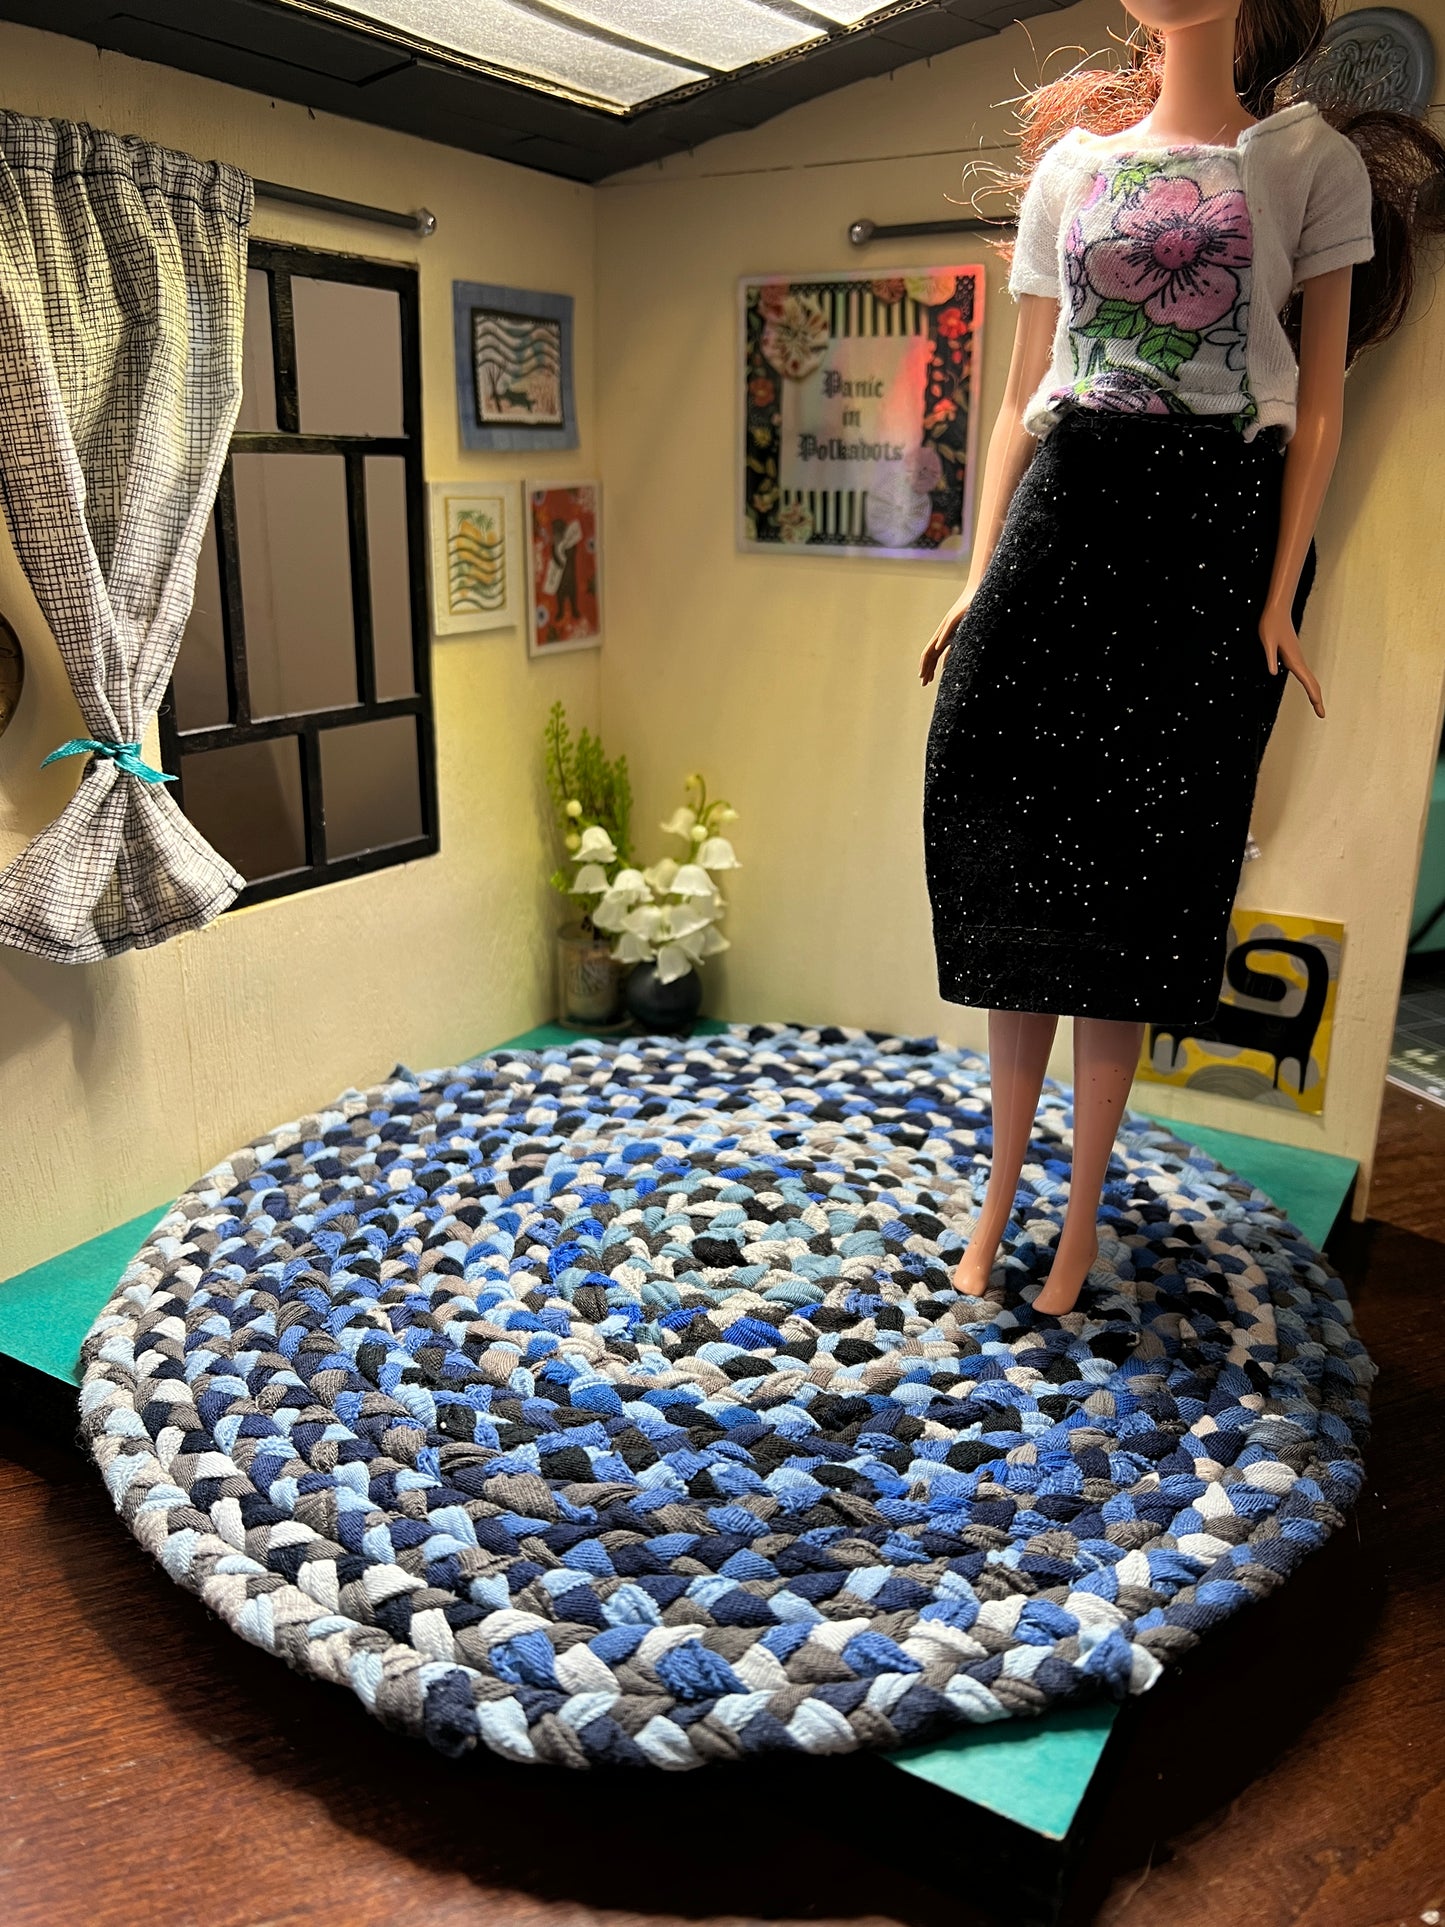 view of miniature rug in a room box, with Barbie standing atop the 11" denim blue rug for scale and display ideas